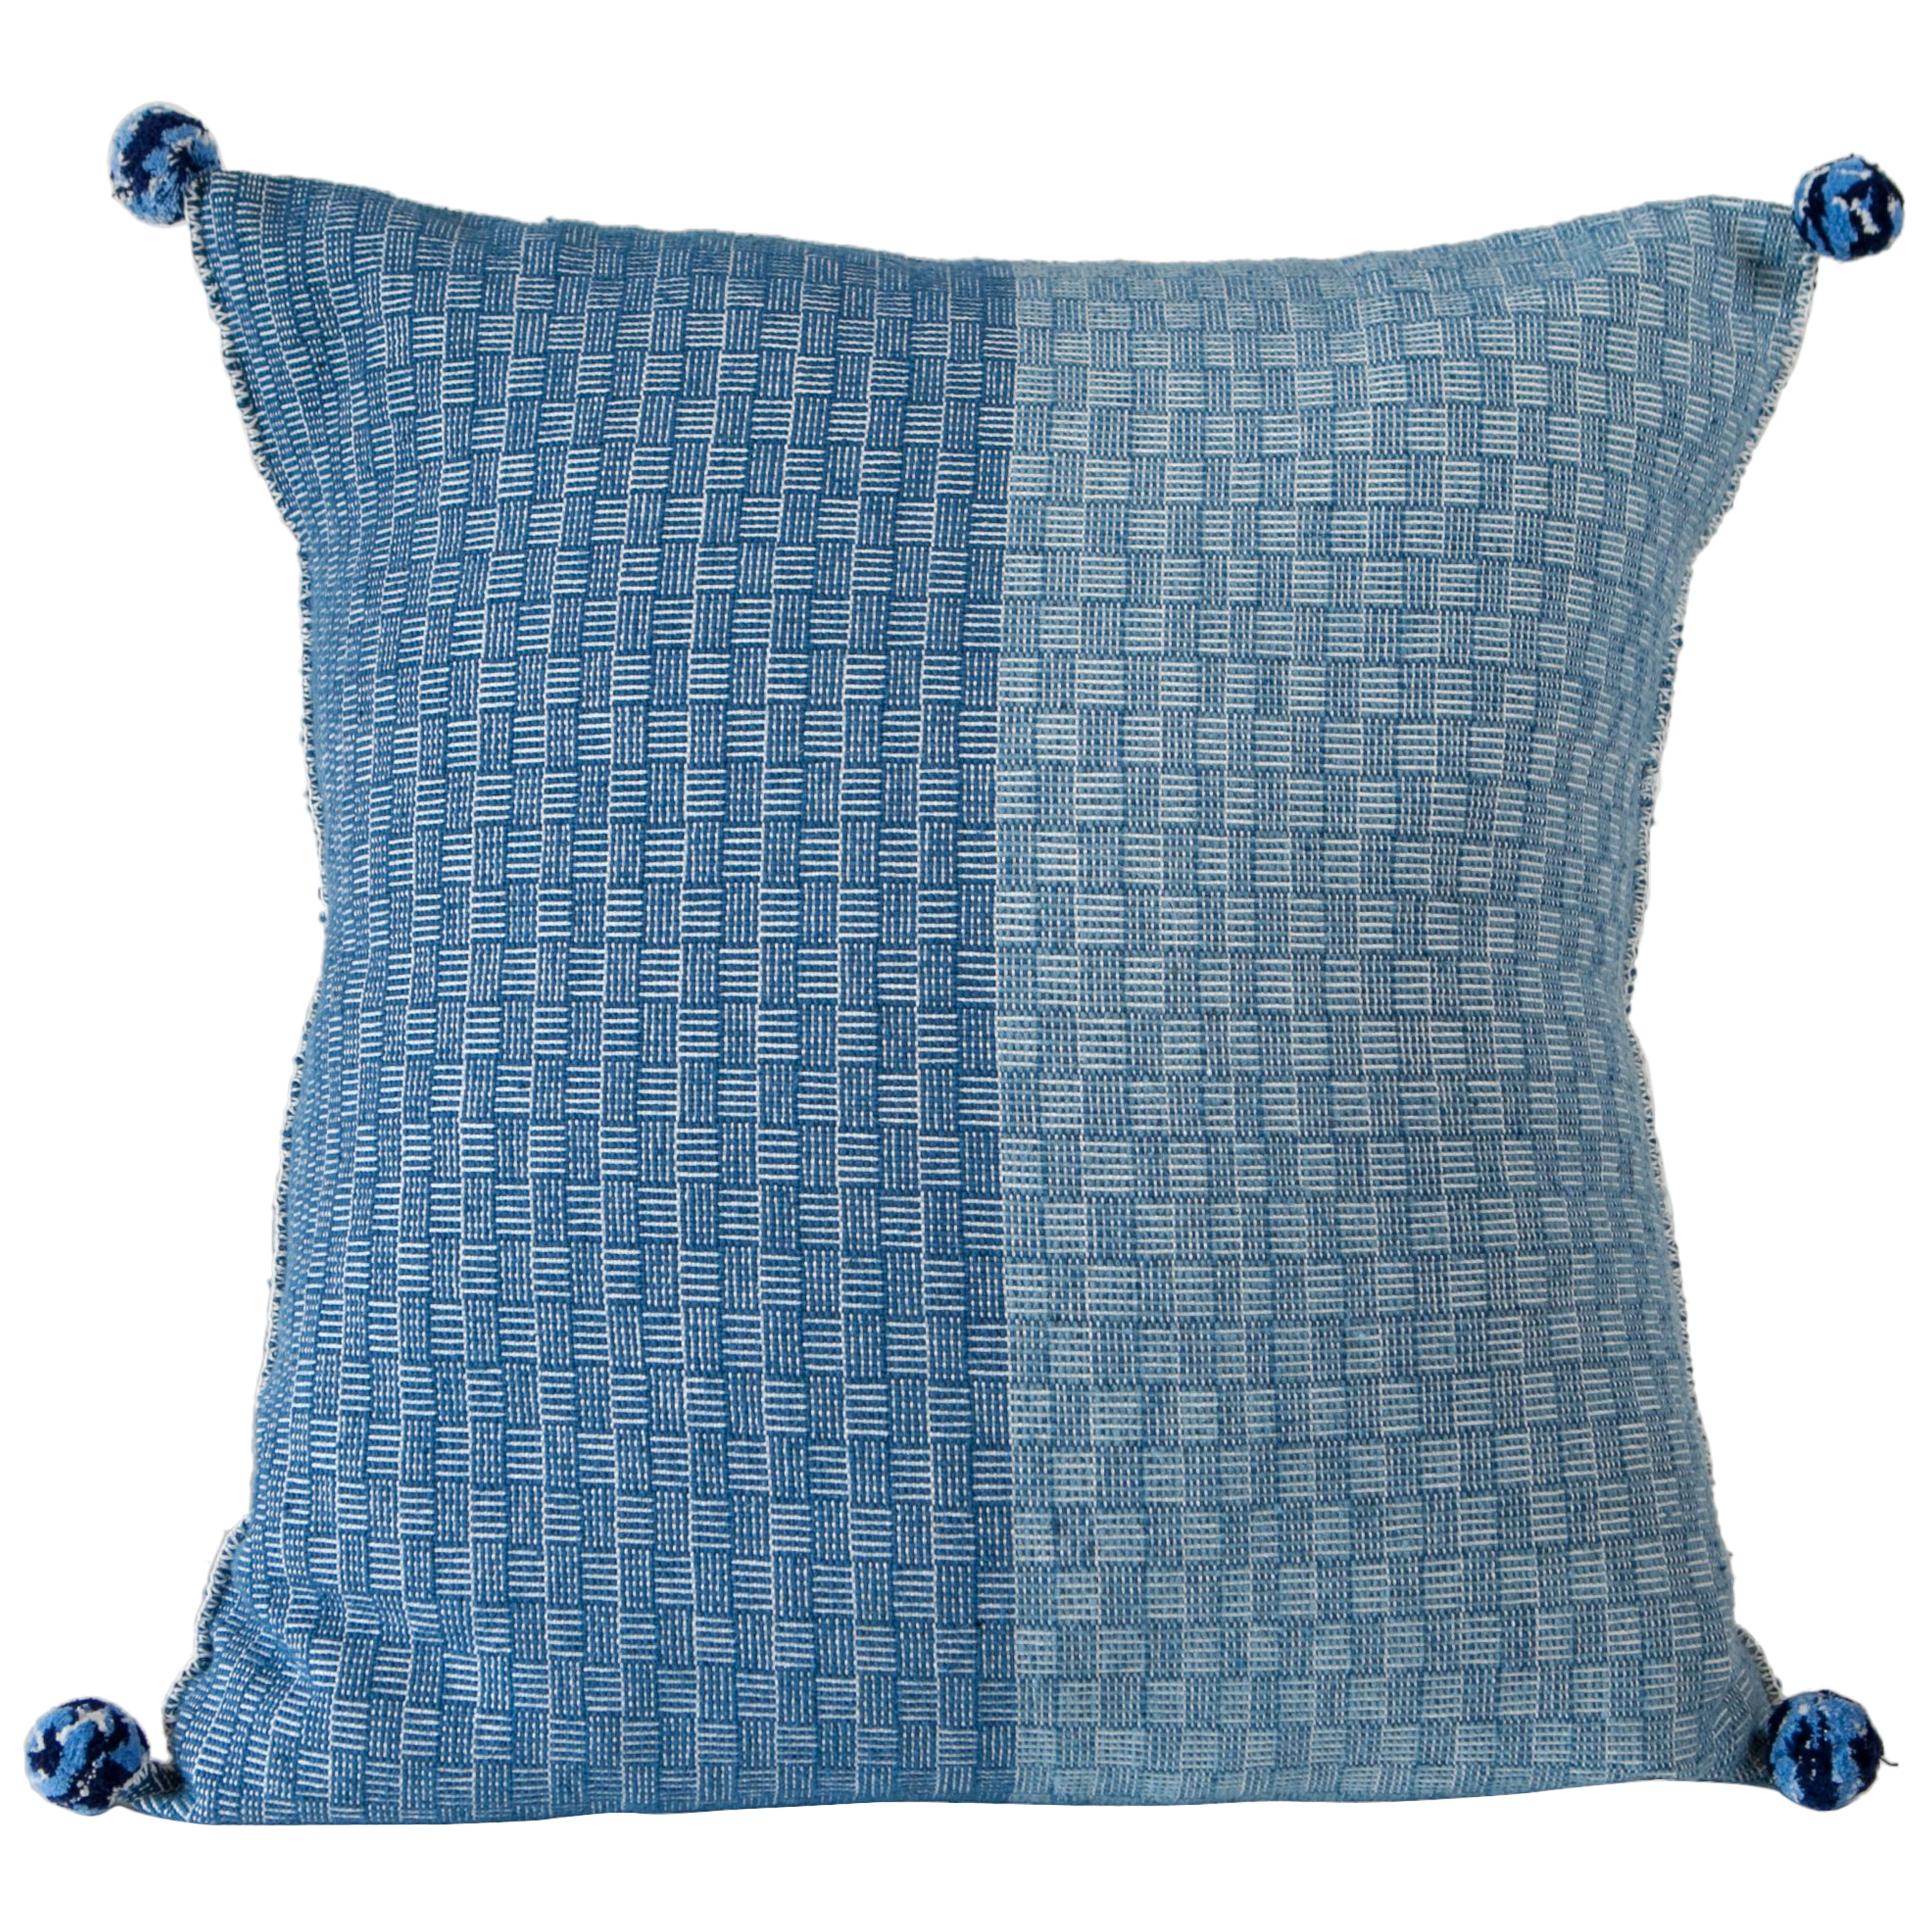 Handwoven Wool Throw Pillow Made with Natural Indigo, in Stock